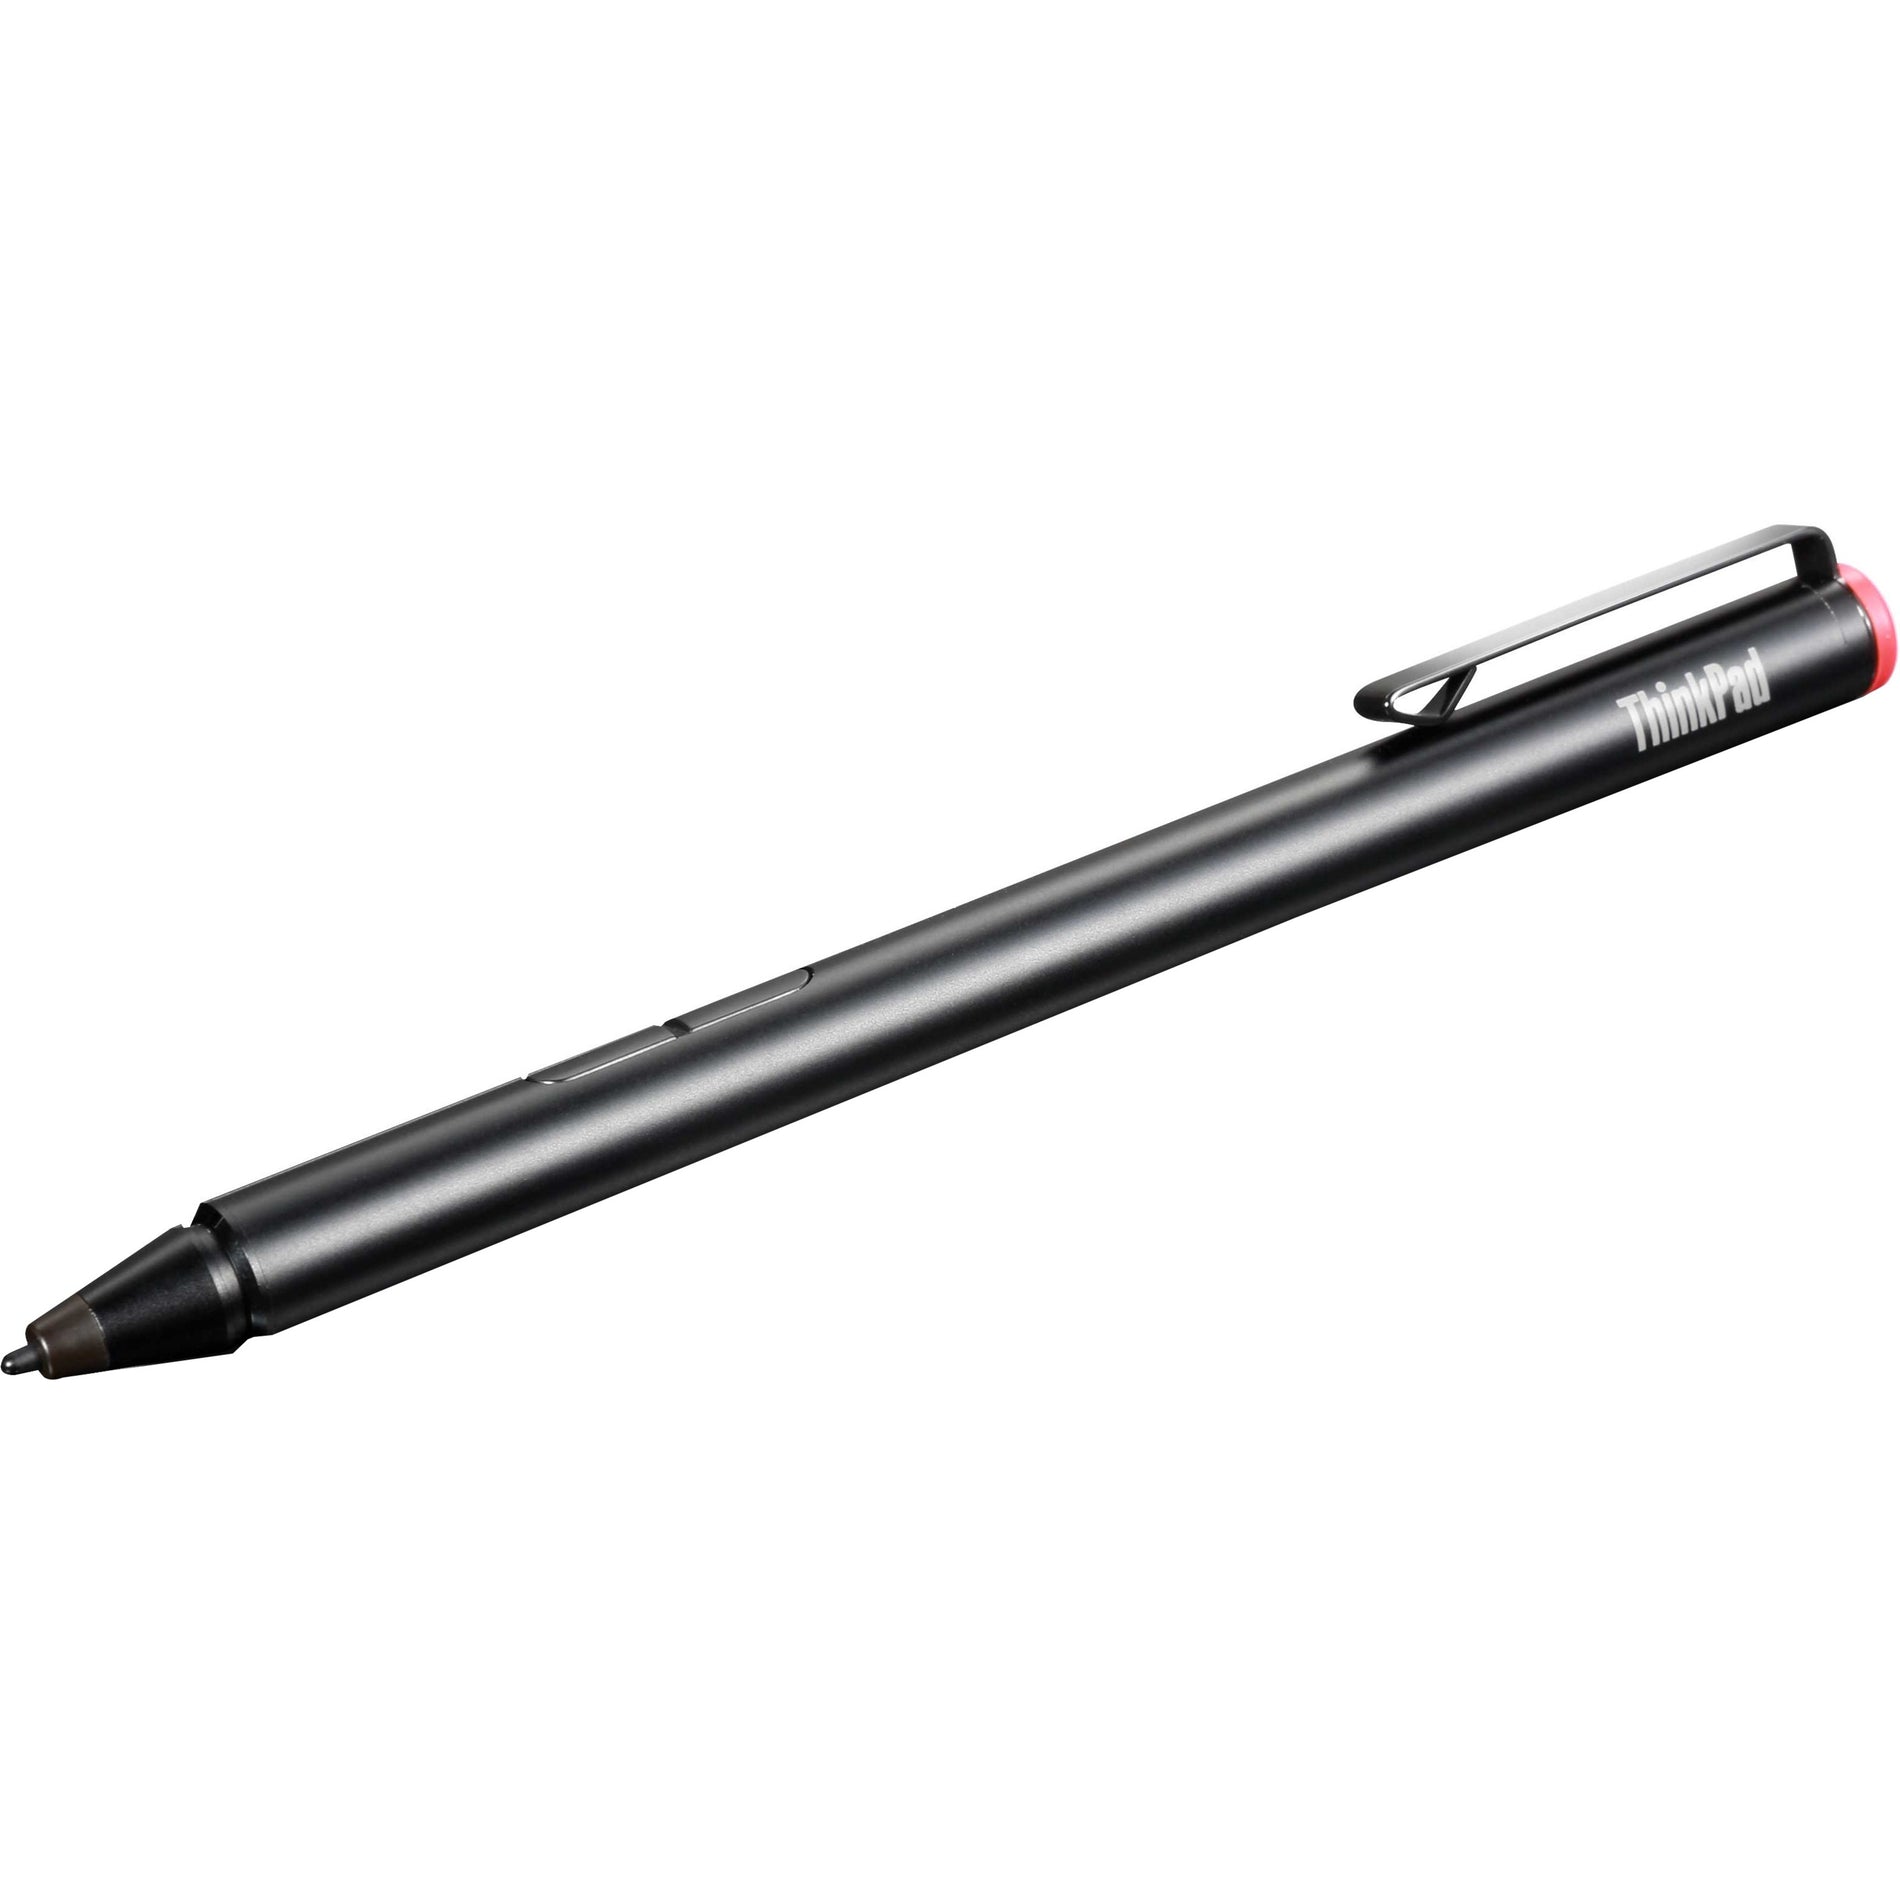 Lenovo 4X80H34887 ThinkPad Pen Pro, Tablet Device Supported